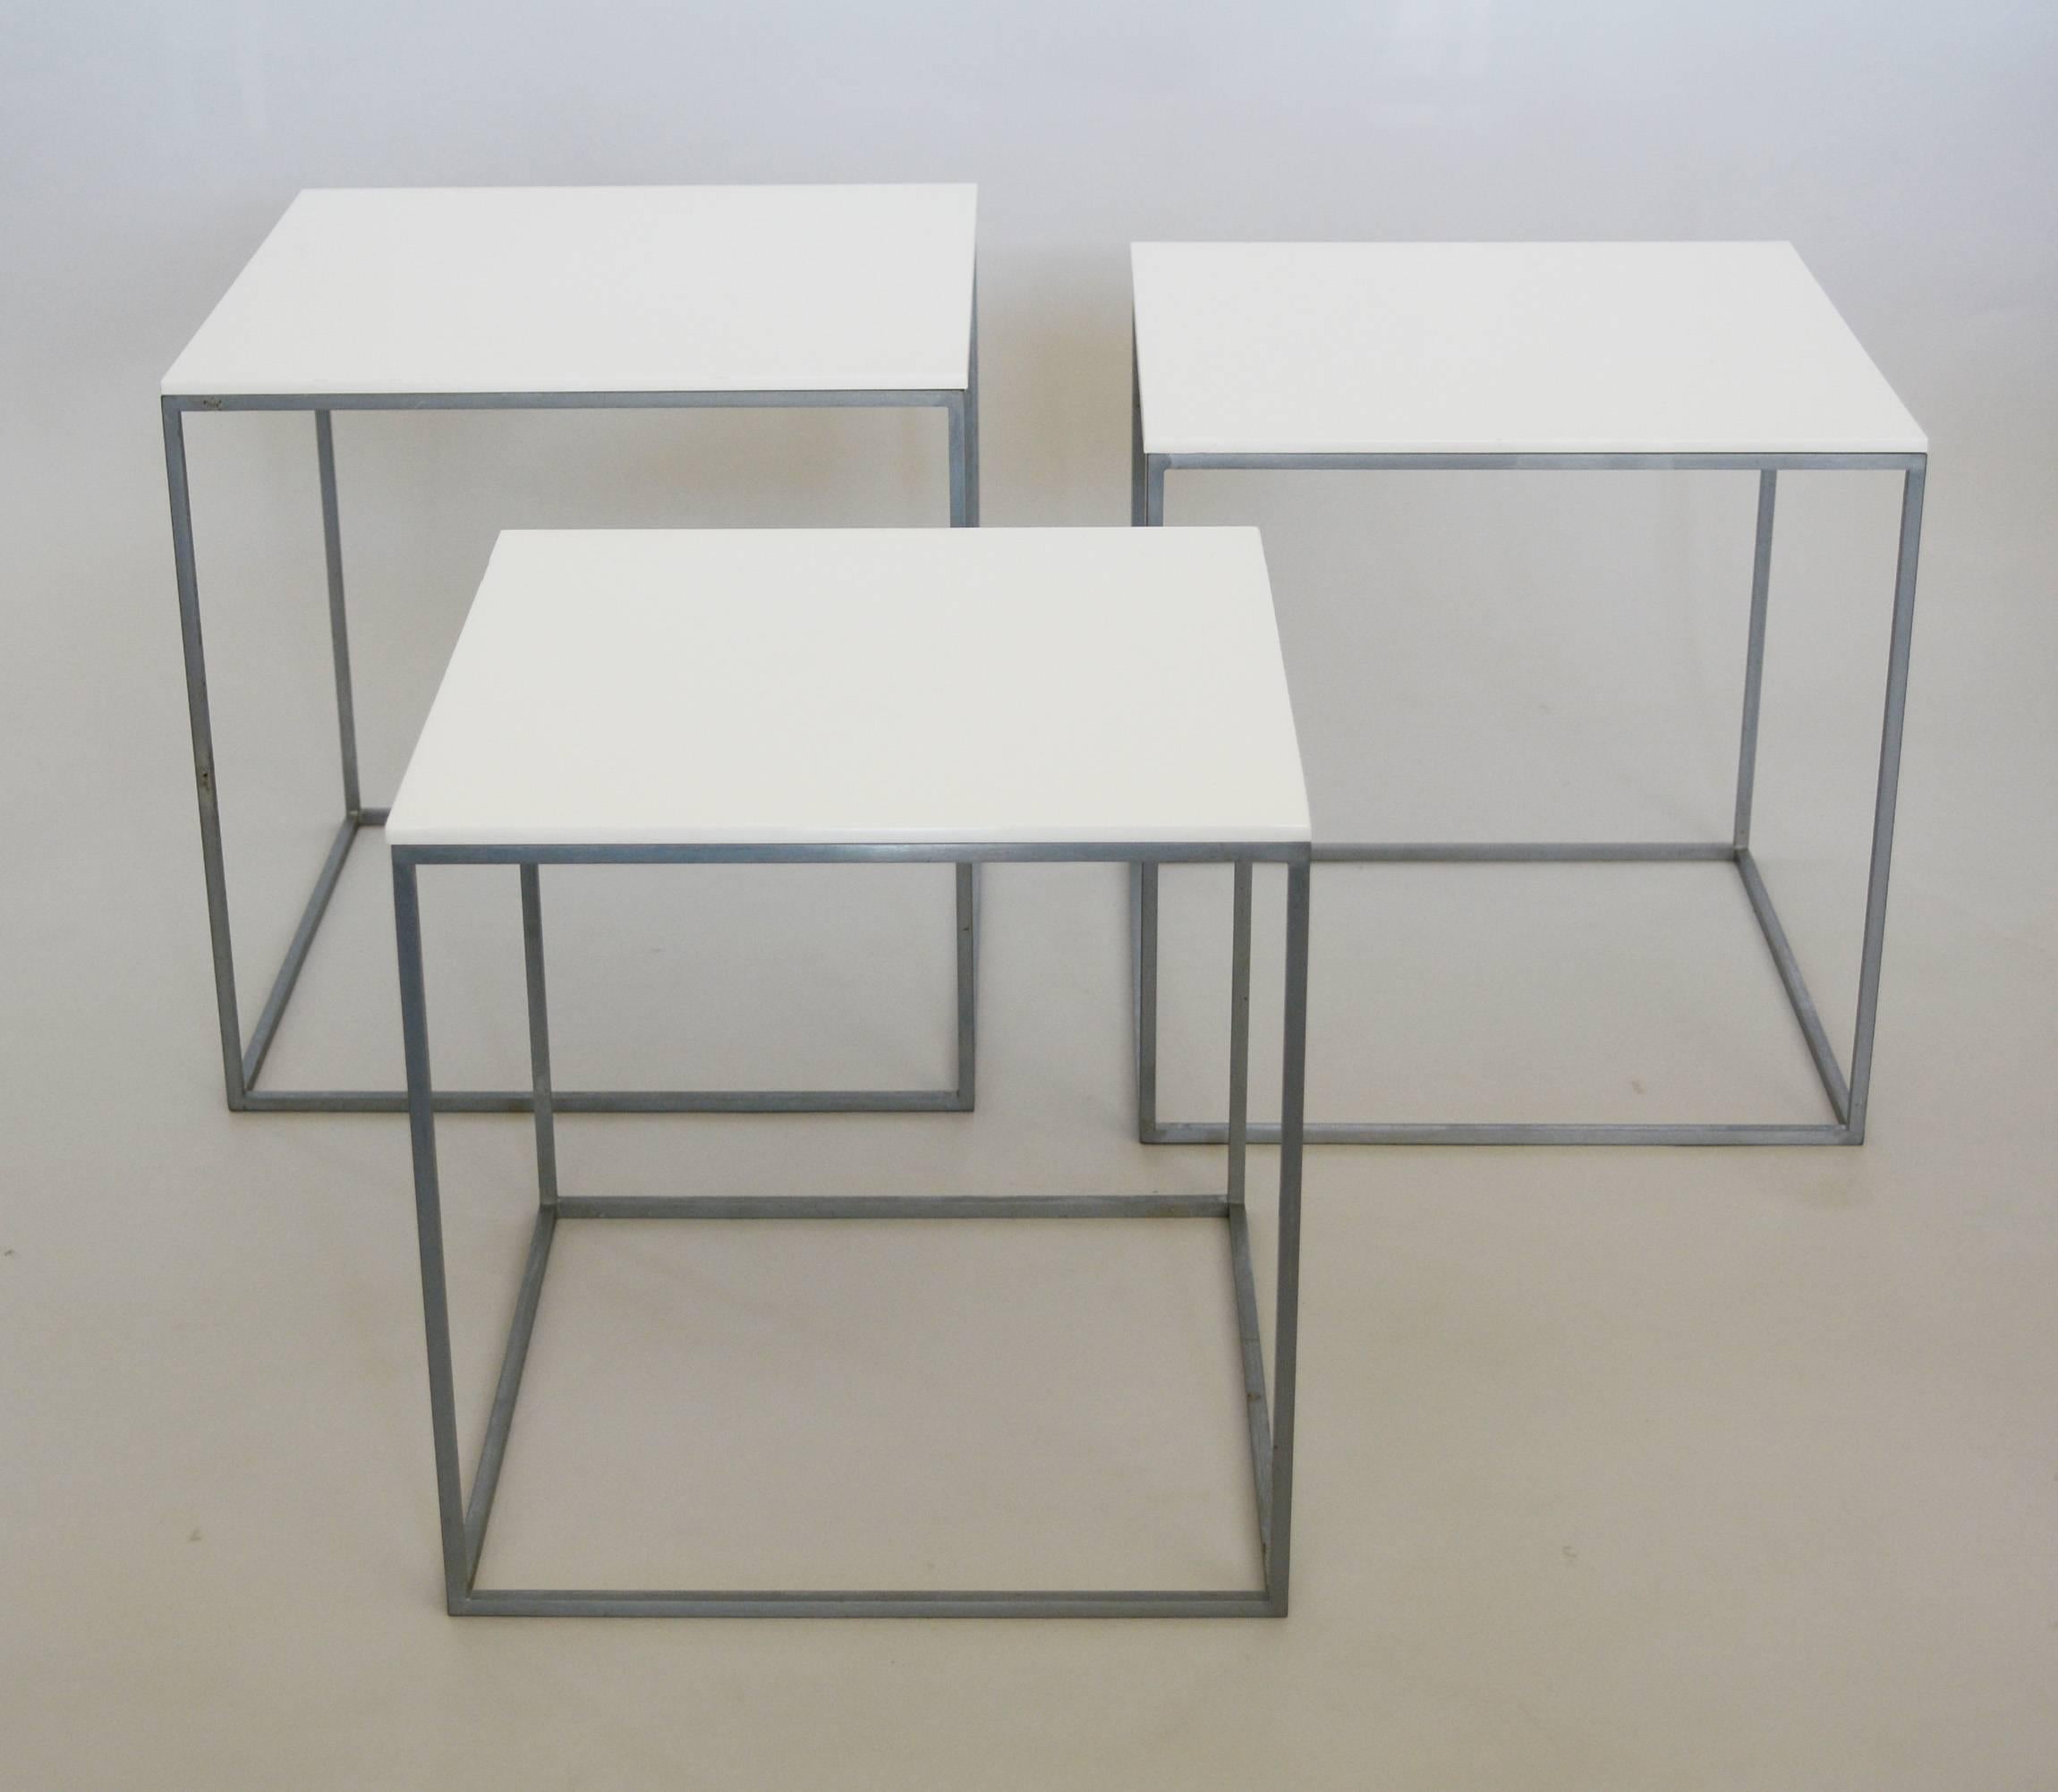 Three small nesting tables by Poul Kjaerholm. They have a matte chrome-plated finish on steel with white acrylic tops. The smallest table is stamped 